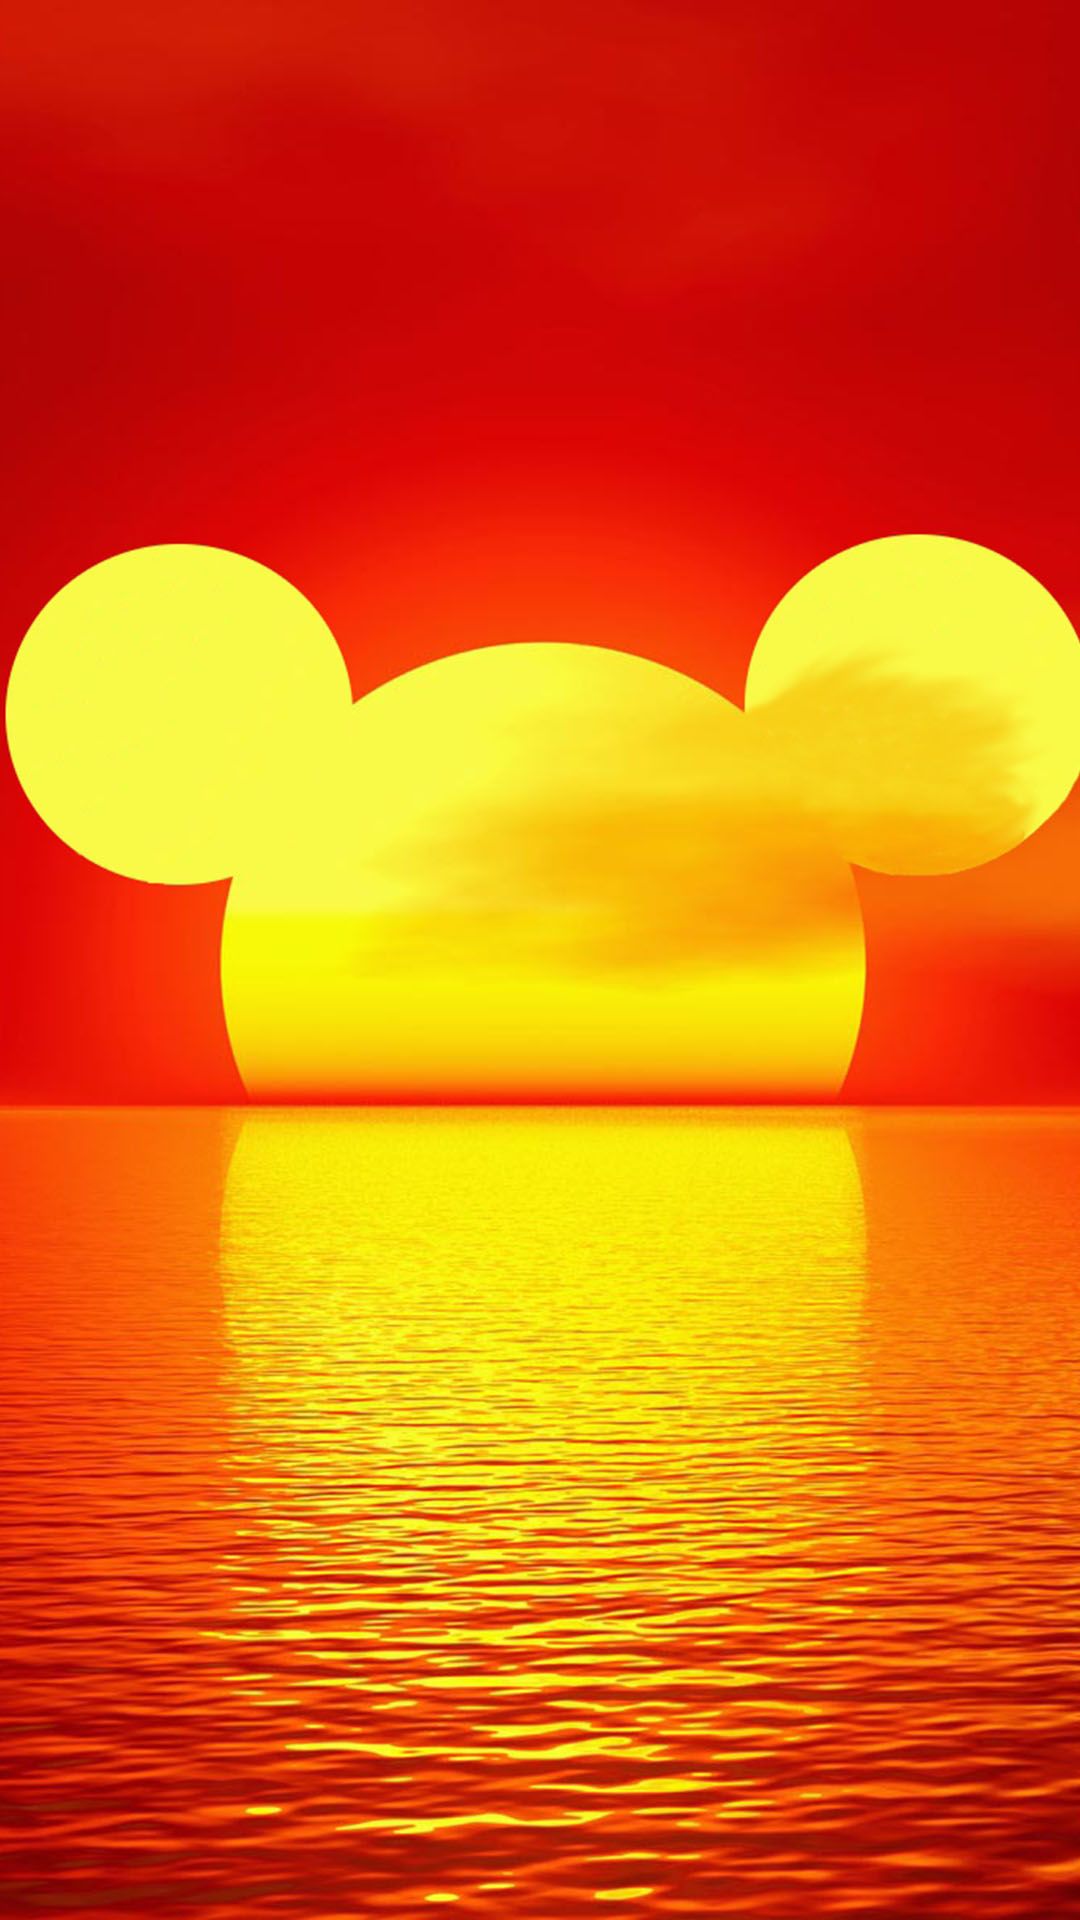 Mickey Mouse Wallpapers Iphone Se - HD Wallpaper 